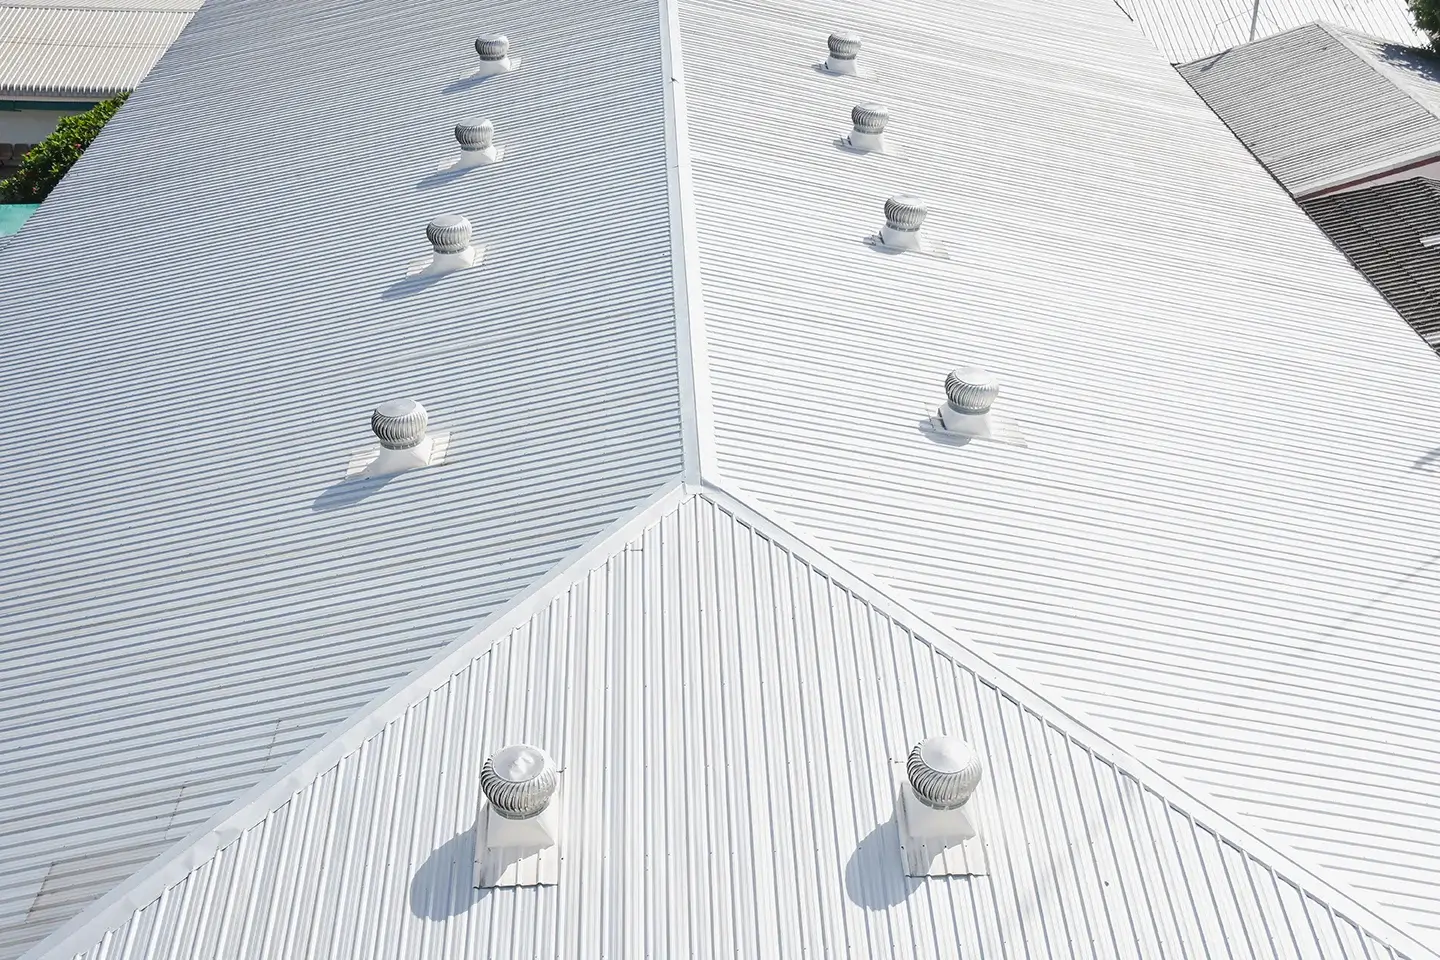 A bird's-eye view of a large, white, metal roof with multiple evenly spaced ventilation caps showcases the meticulous work of a skilled roofing contractor.